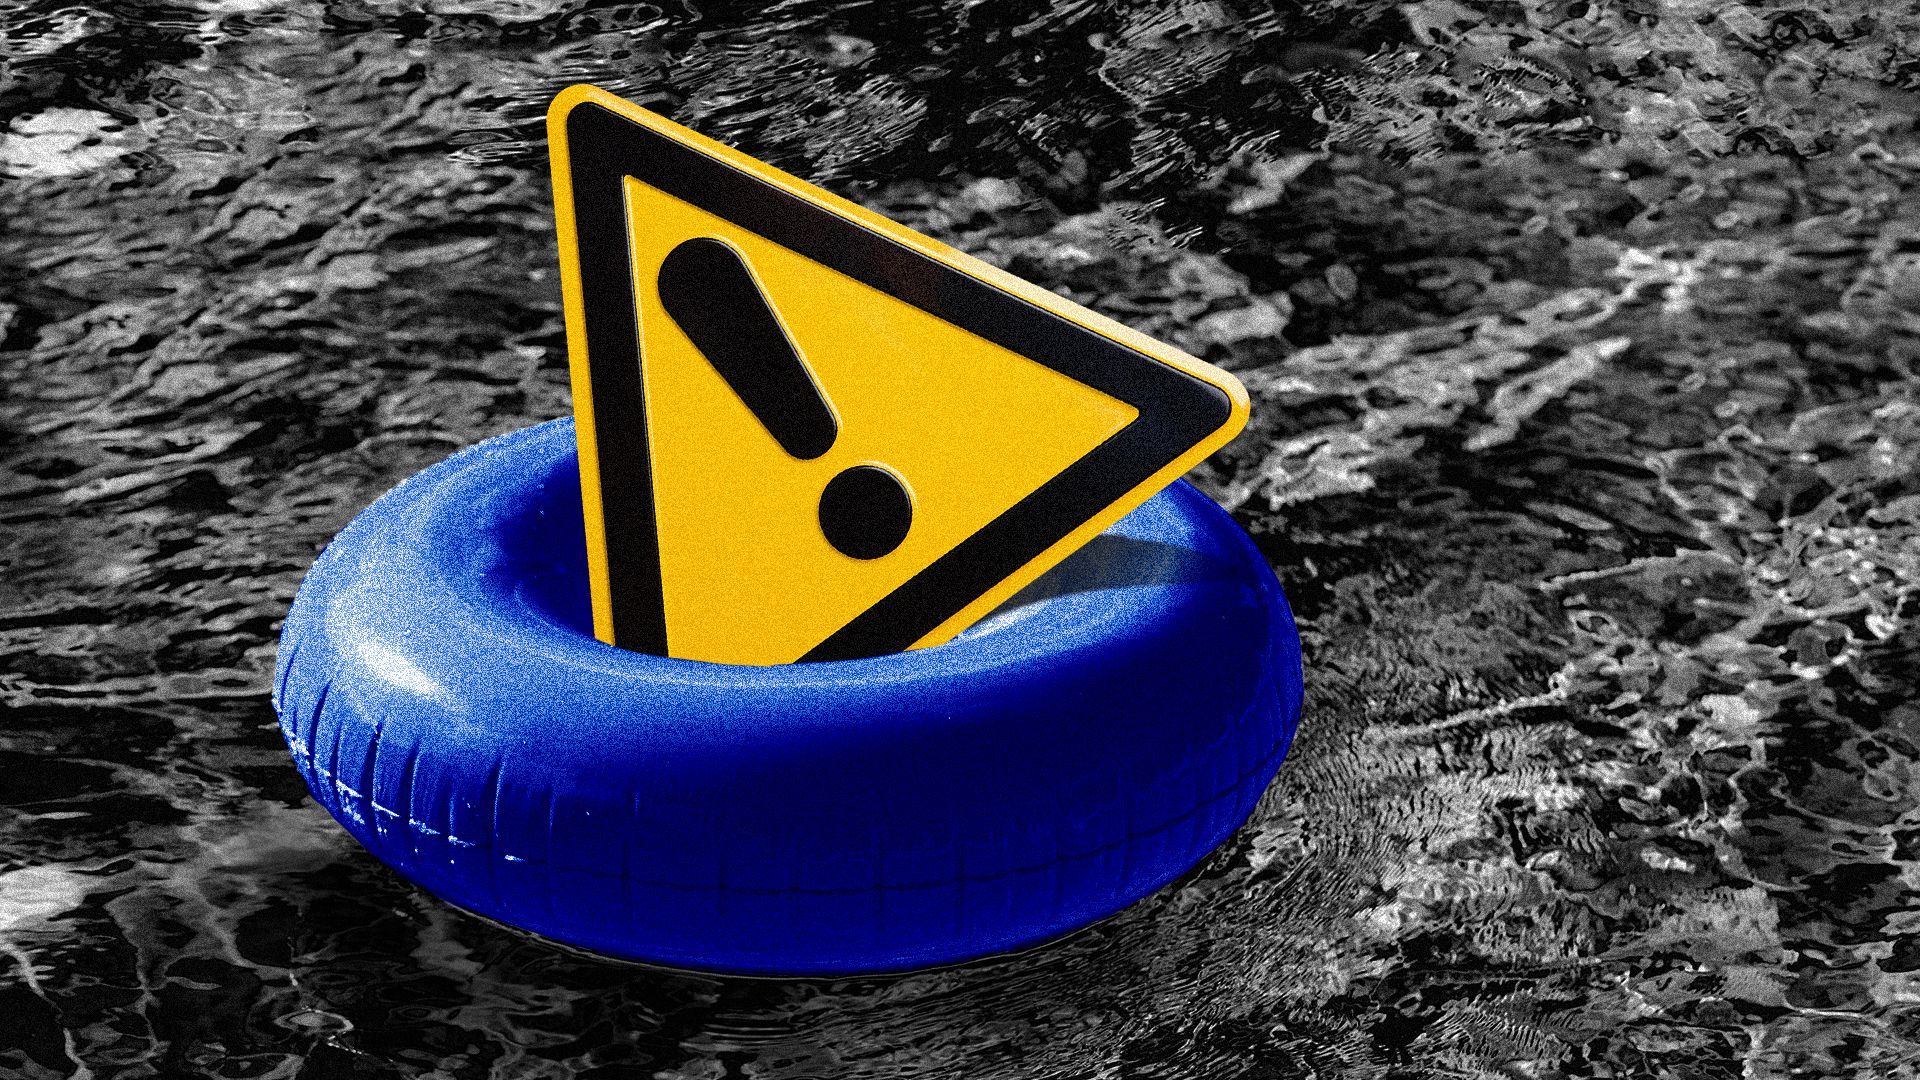 Illustration of a caution sign on an inner tube floating on the water.